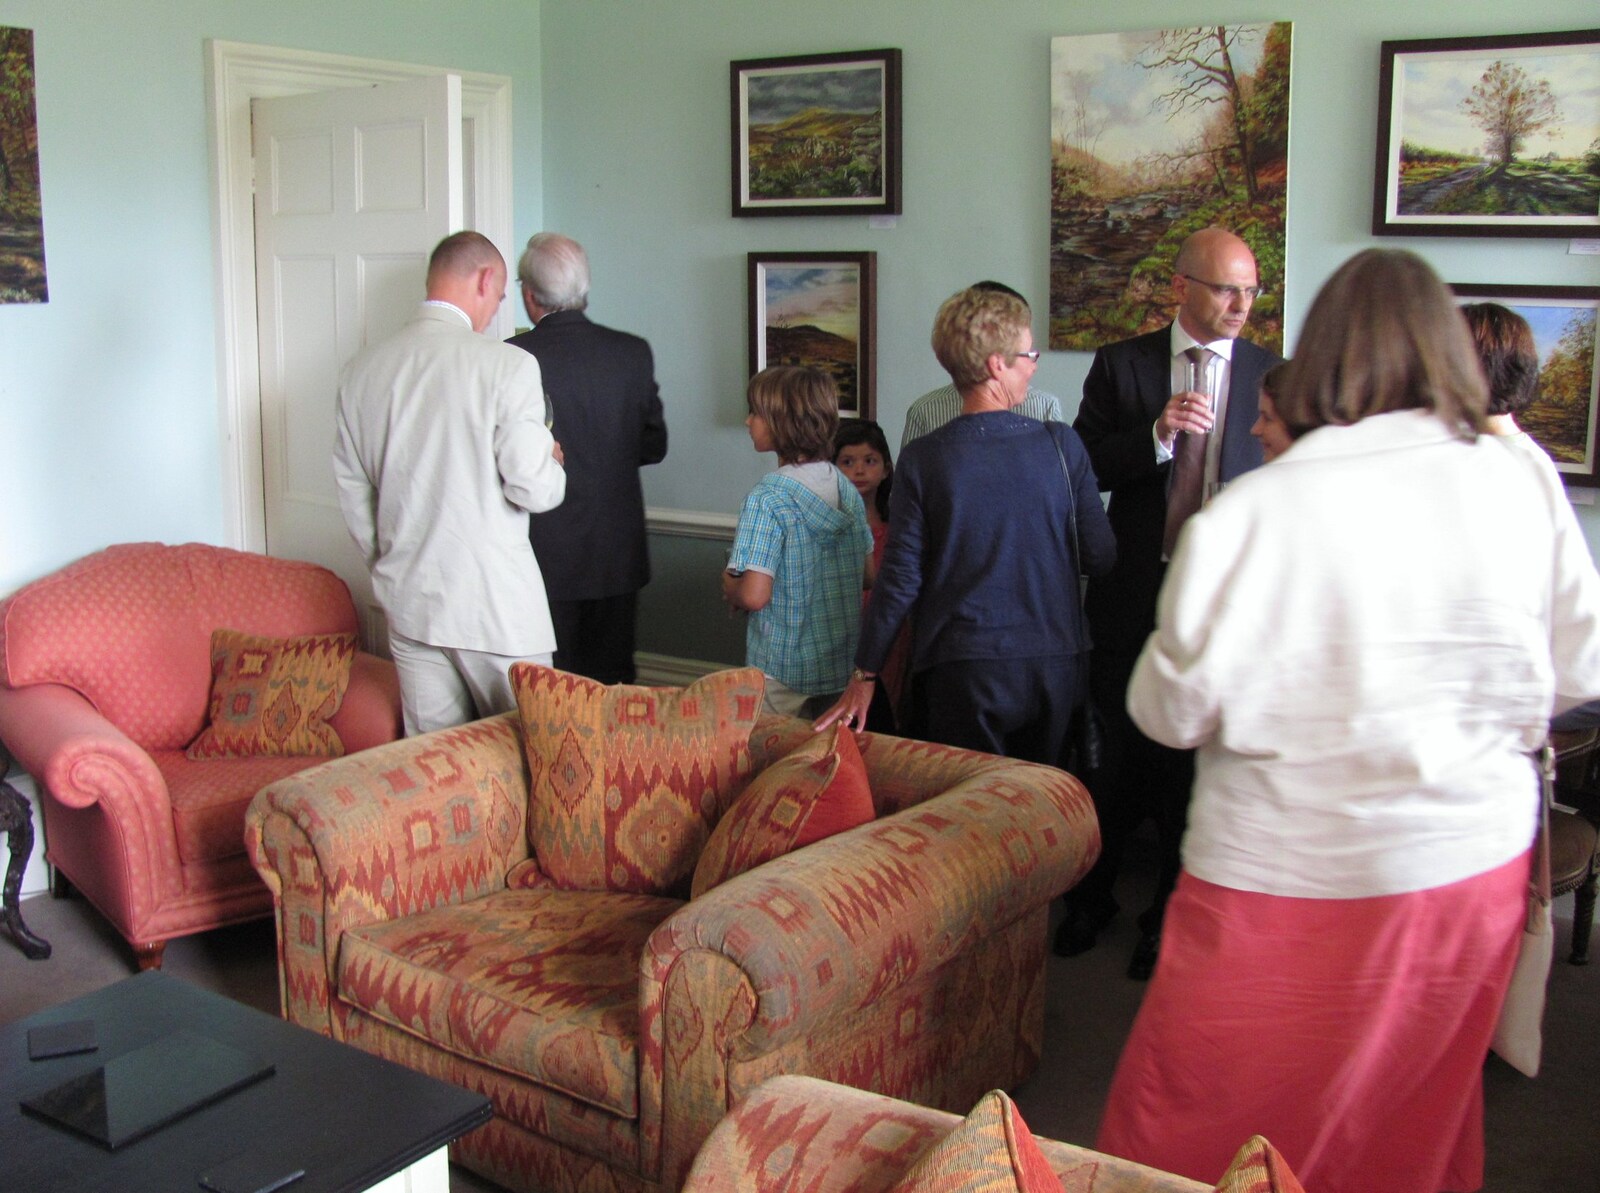 Heading off for lunch from Mike's Memorial, Prince Hall Hotel, Two Bridges, Dartmoor - 12th July 2011